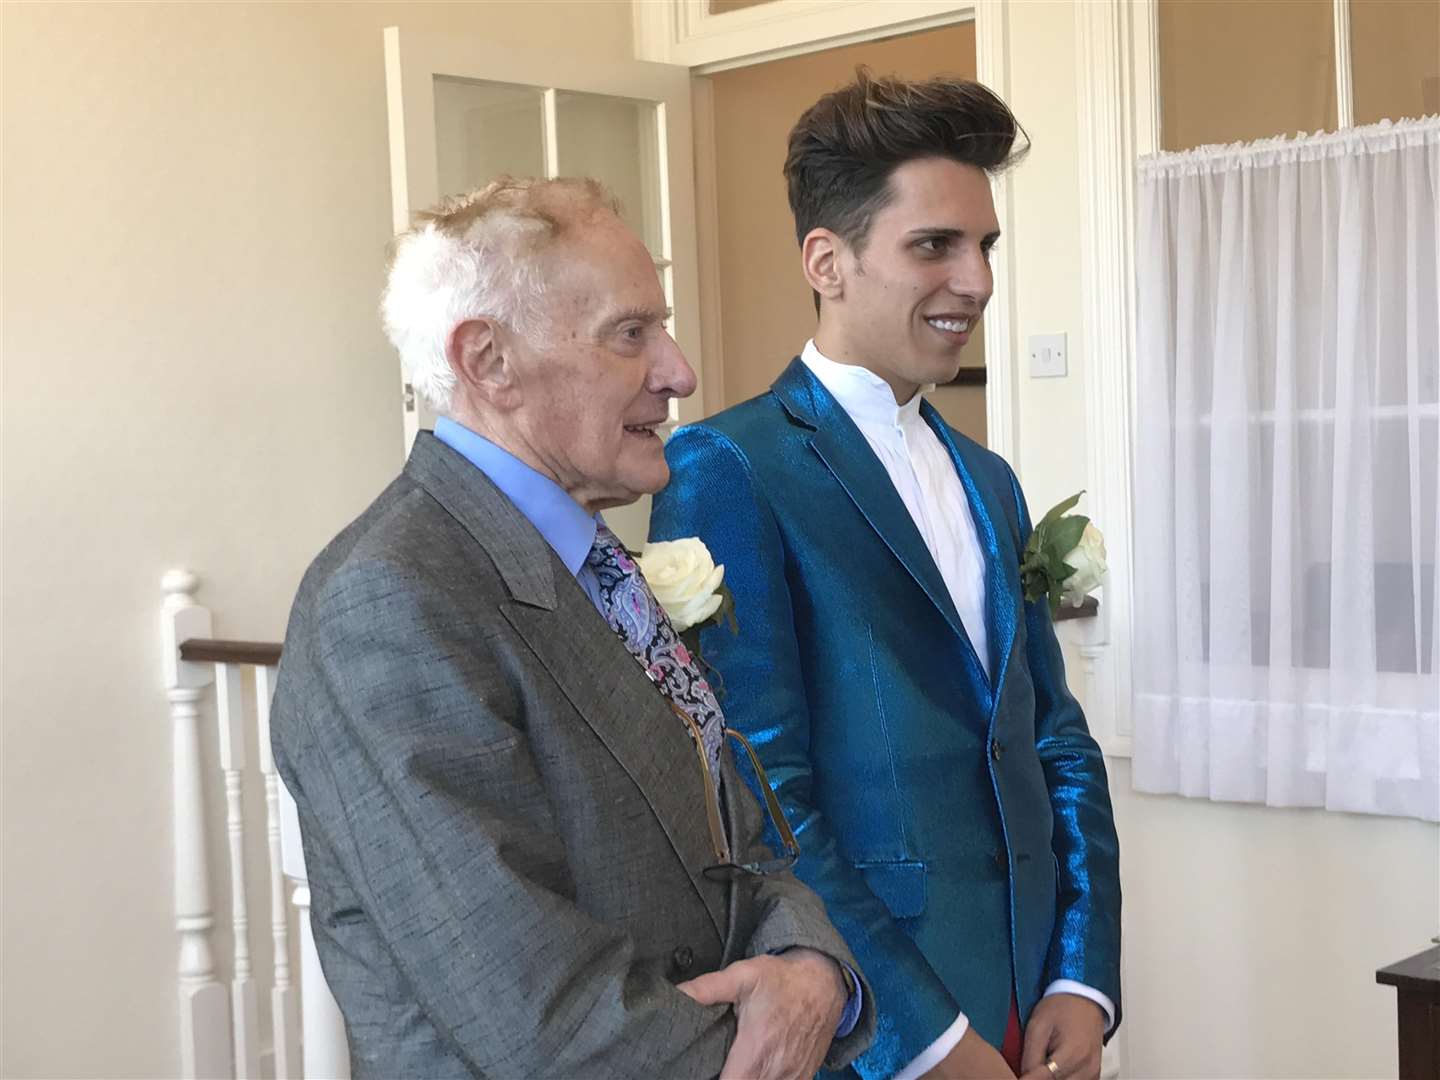 Philip Clements and Florin Marin on their wedding day